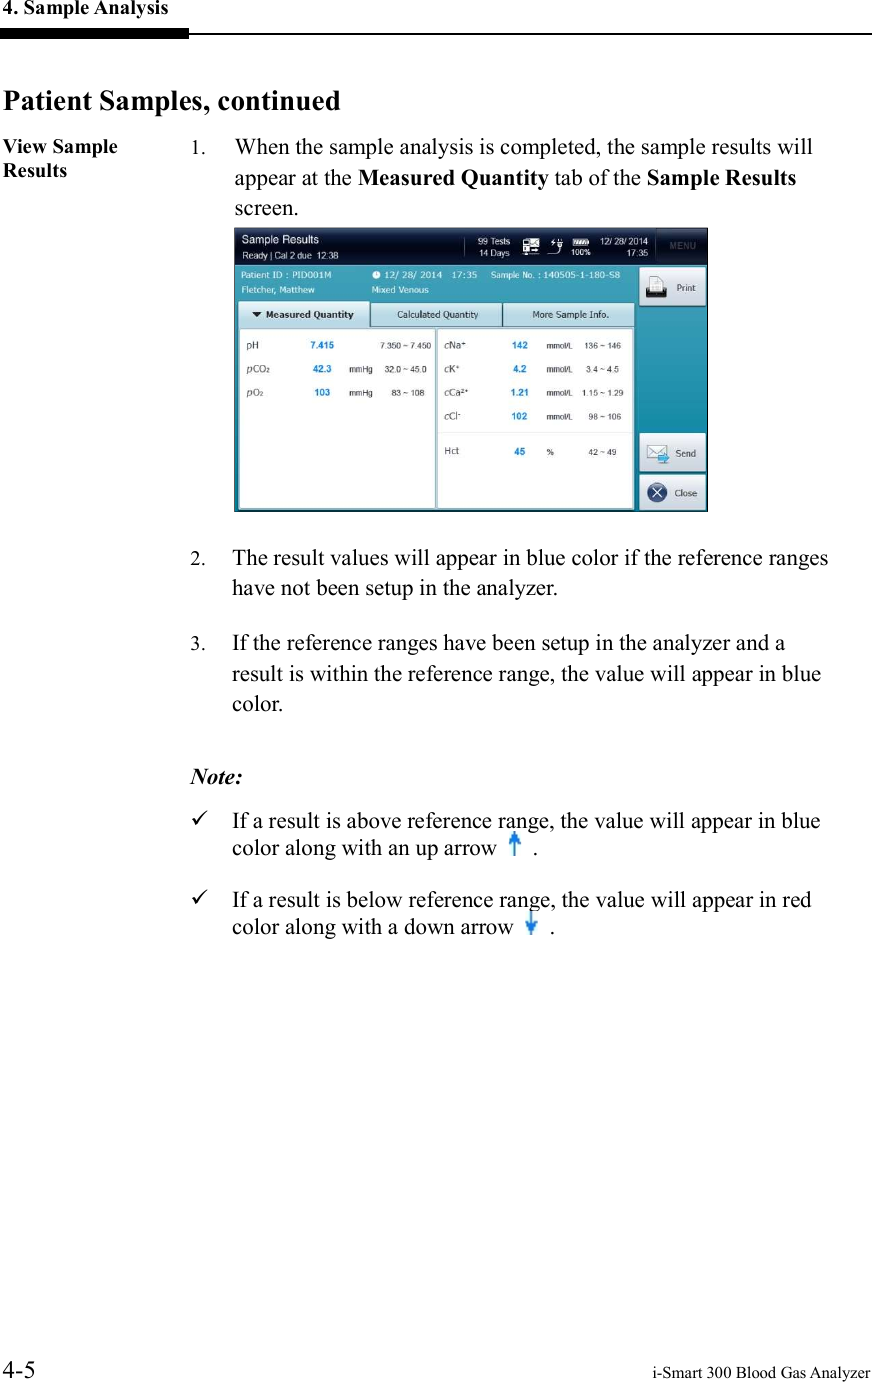 4. Sample Analysis     4-5    i-Smart 300 Blood Gas Analyzer  Patient Samples, continued View Sample Results 1. When the sample analysis is completed, the sample results will appear at the Measured Quantity tab of the Sample Results screen.  2. The result values will appear in blue color if the reference ranges have not been setup in the analyzer. 3. If the reference ranges have been setup in the analyzer and a result is within the reference range, the value will appear in blue color.  Note:  If a result is above reference range, the value will appear in blue color along with an up arrow    .  If a result is below reference range, the value will appear in red color along with a down arrow    .  